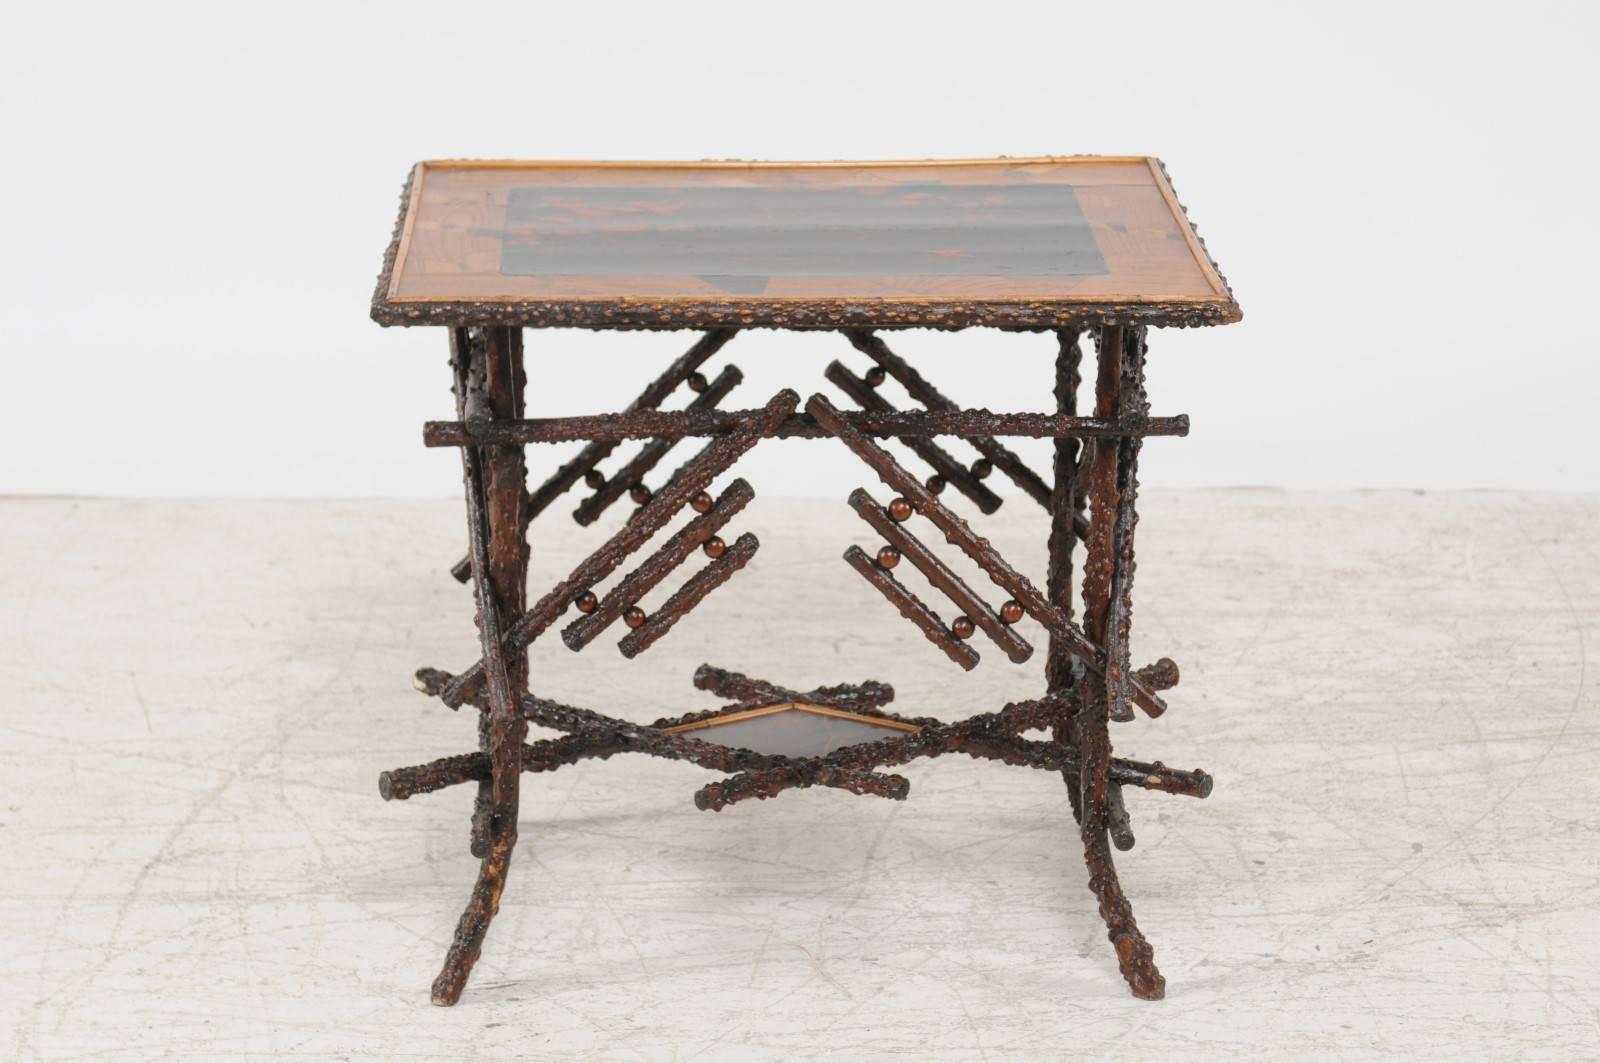 An English Chinese Chippendale style briar wood side table with unusual top and lower shelf from the late 19th century. This English side table features an eye-catching top adorned with various geometrical motifs surrounding a black and red central